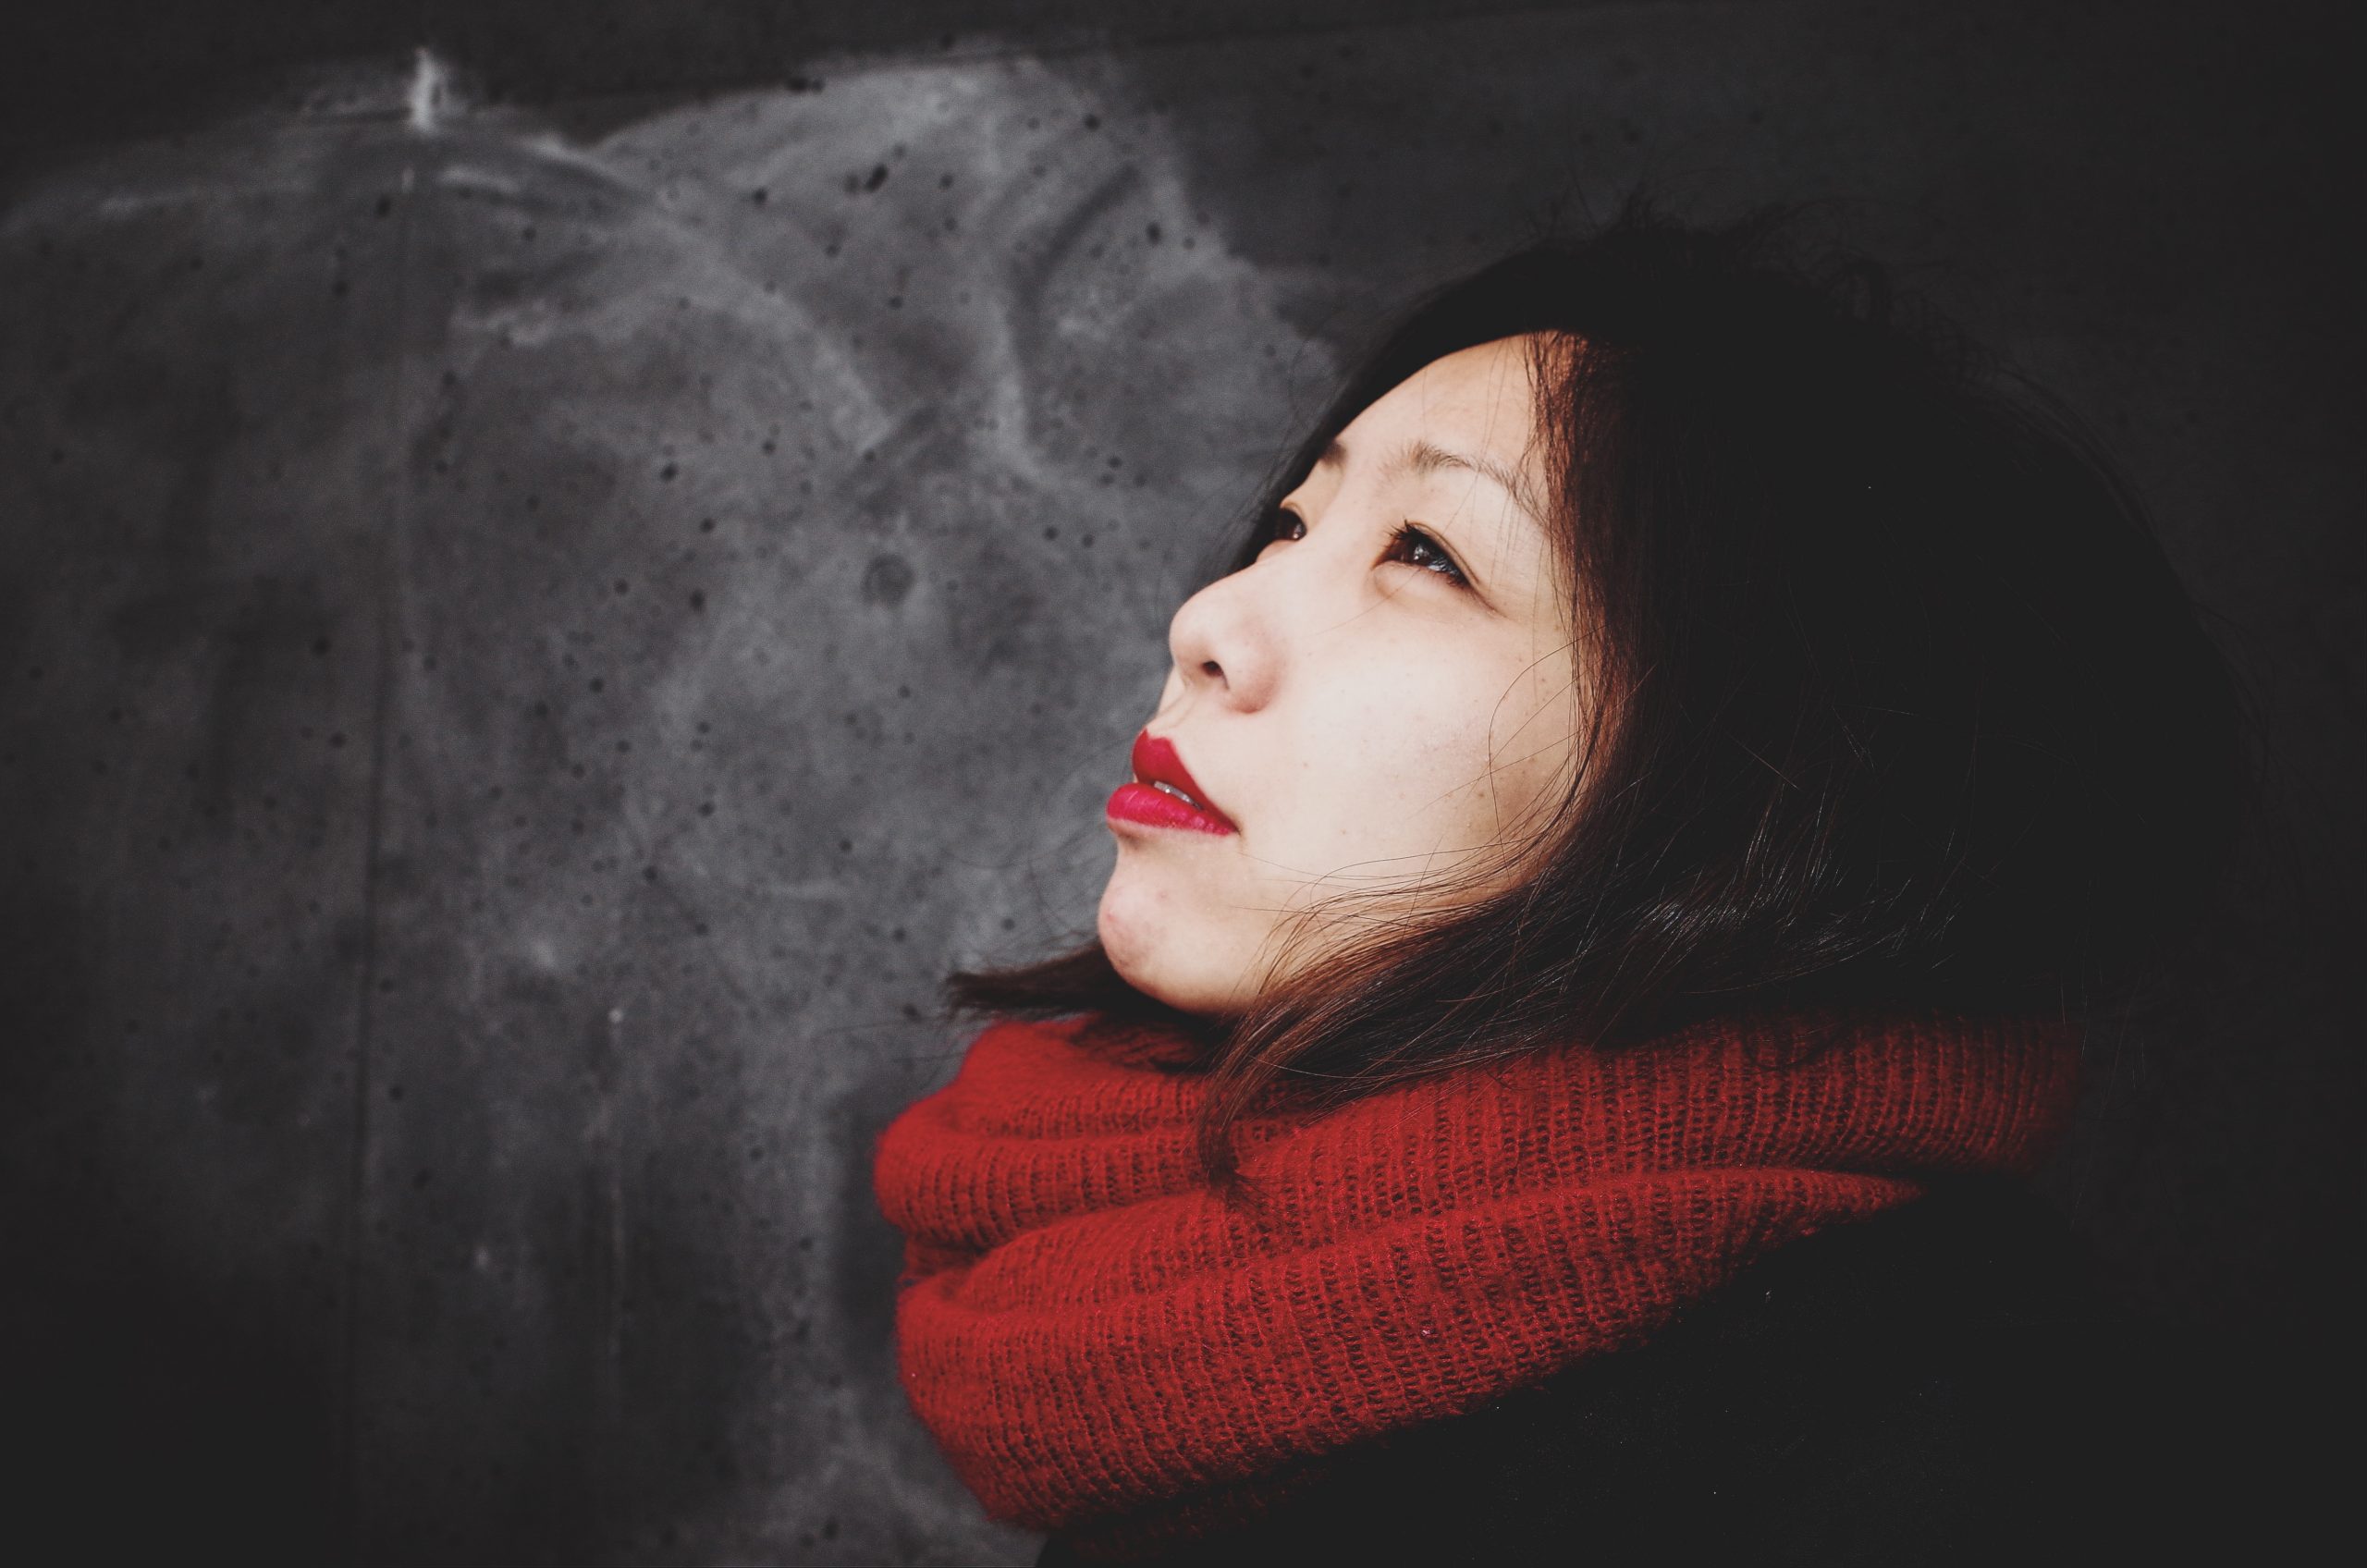 Cindy wearing a red scarf with red lipstick against grey and white wall in Berlin germany